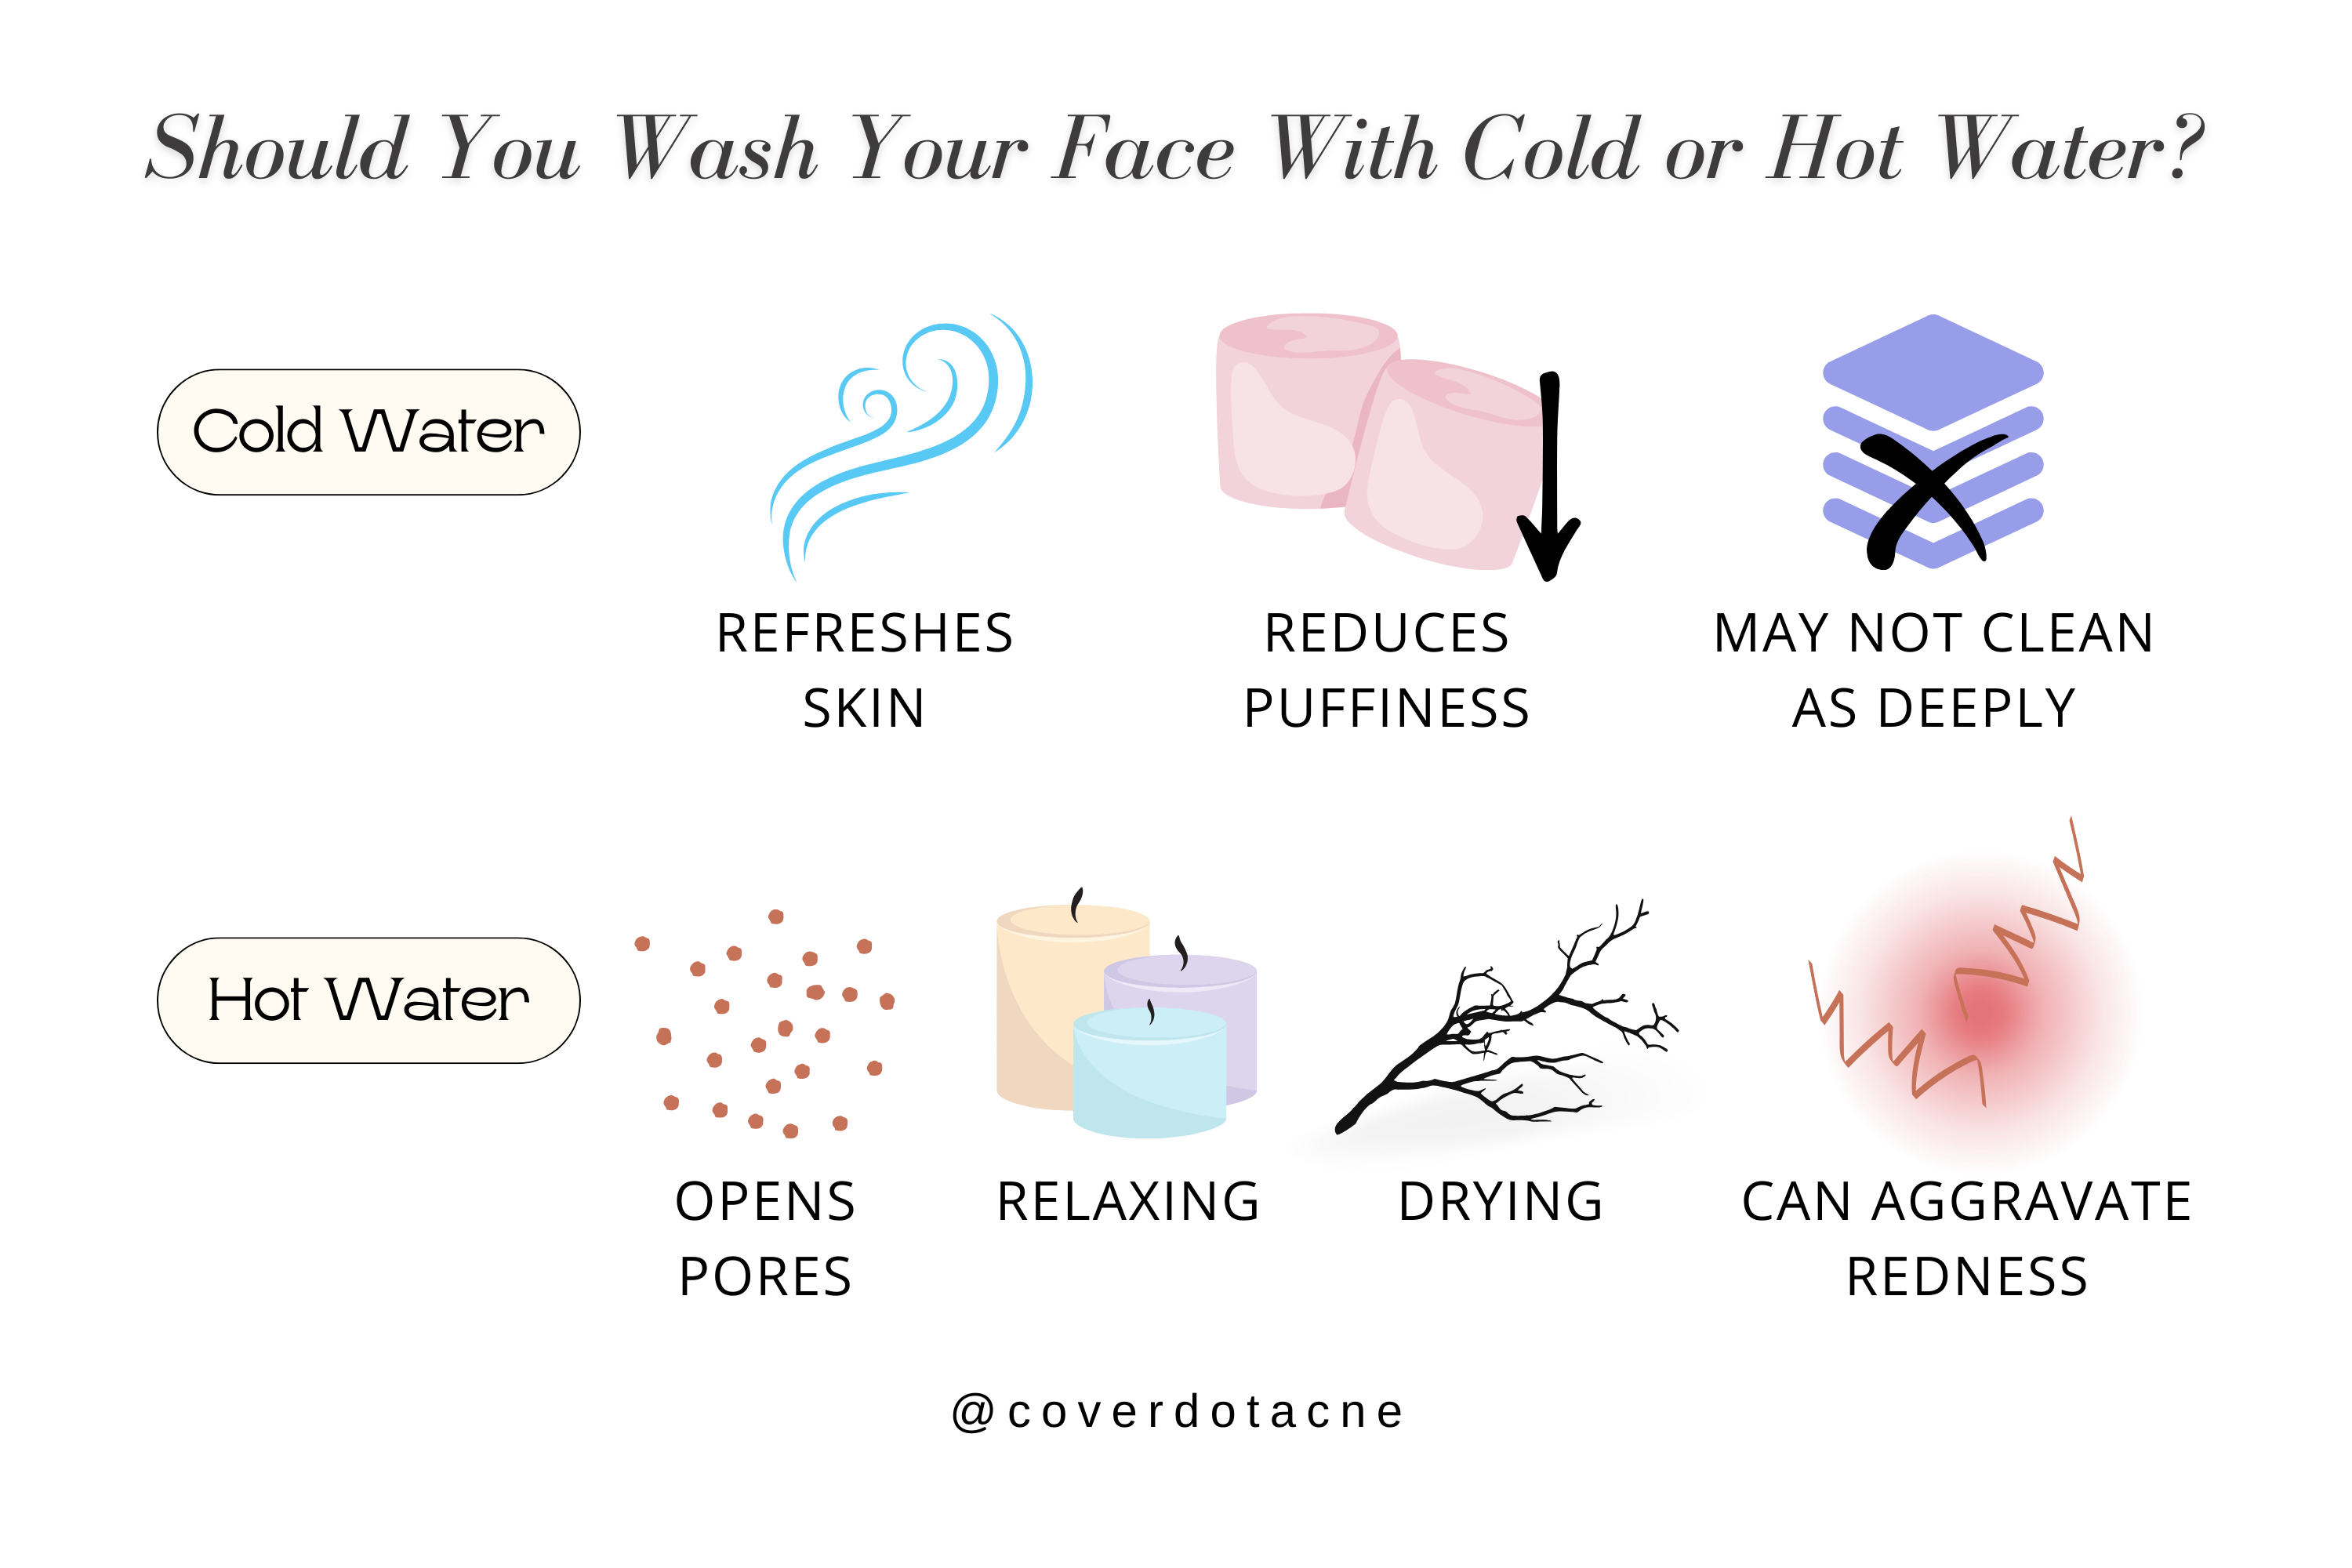 Should You Wash Your Face With Cold or Hot Water